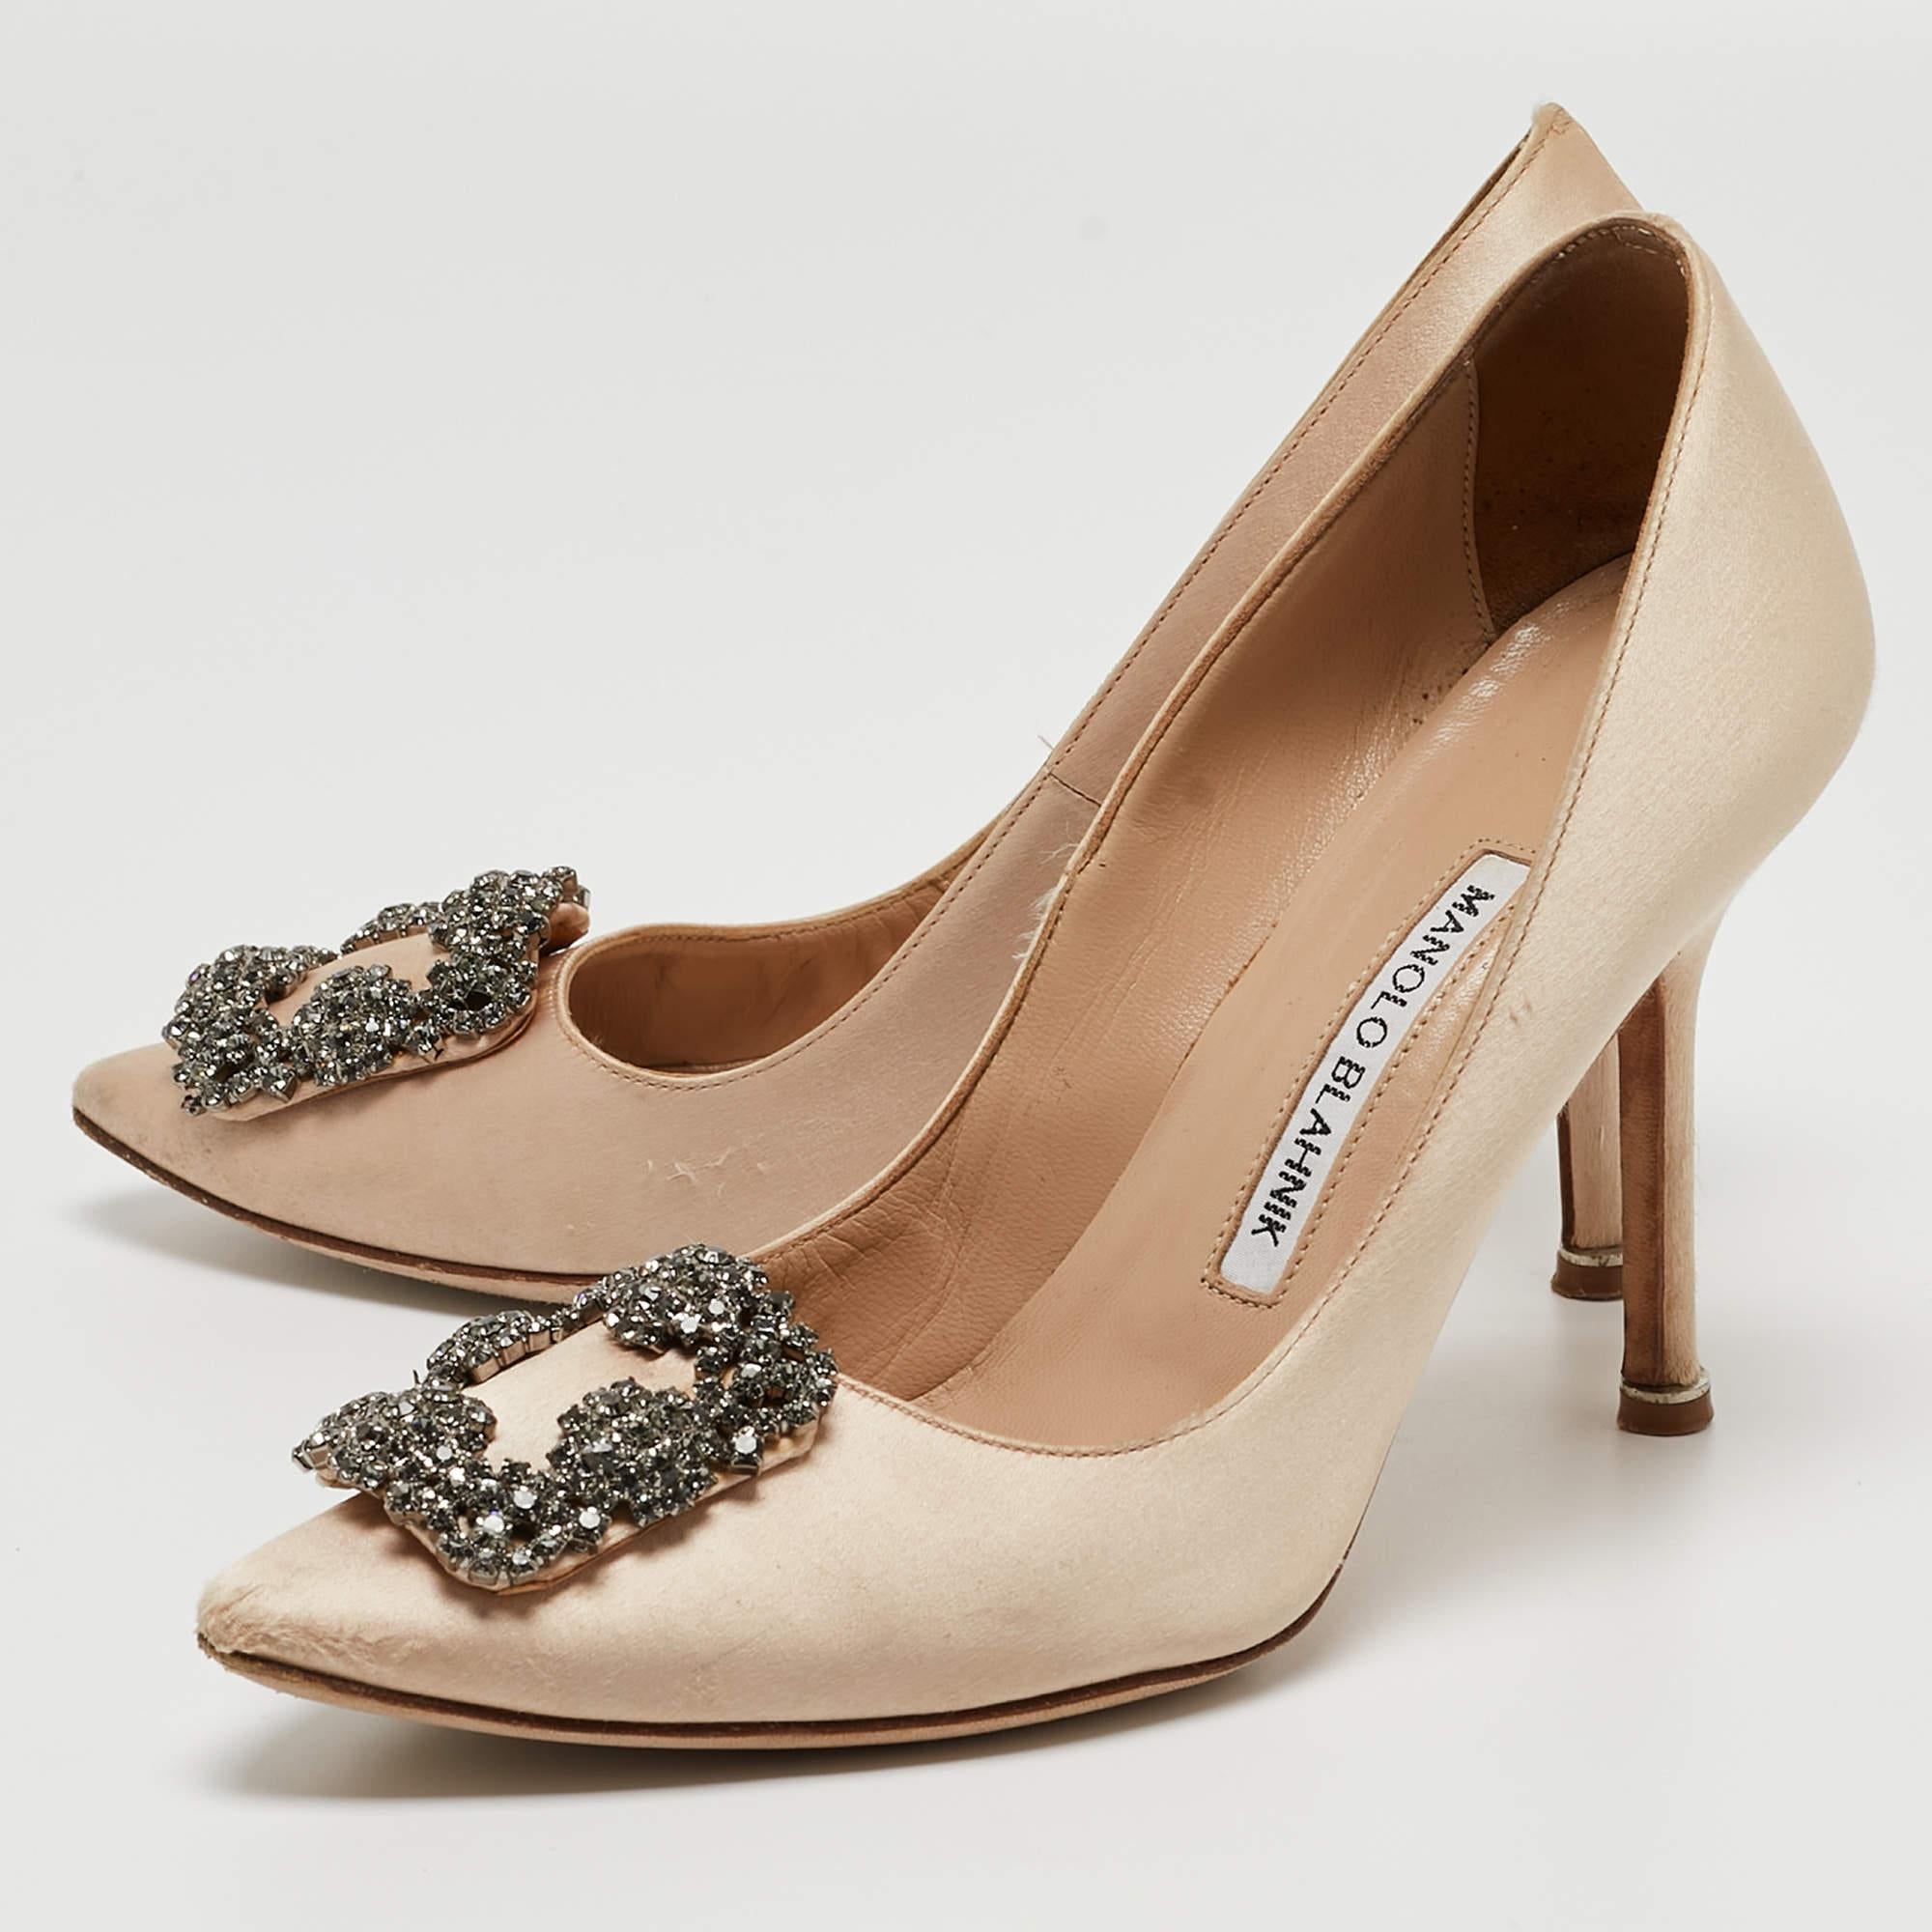 The fashion house’s tradition of excellence, coupled with modern design sensibilities, works to make these Manolo Blahnik pumps a fabulous choice. They'll help you deliver a chic look with ease.

